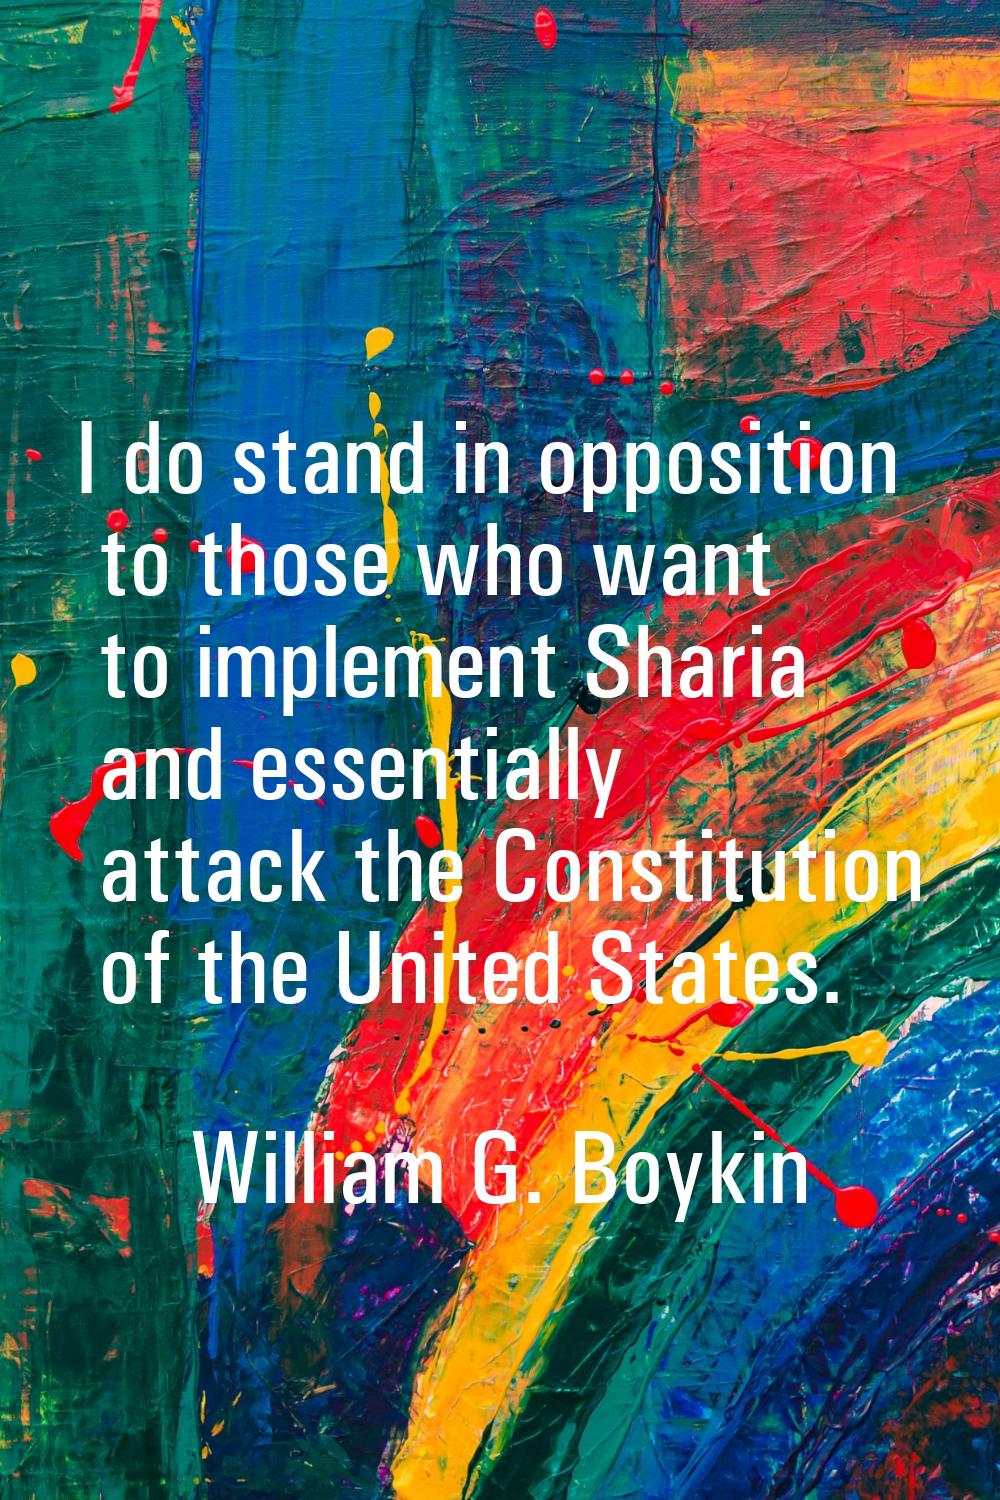 I do stand in opposition to those who want to implement Sharia and essentially attack the Constitut